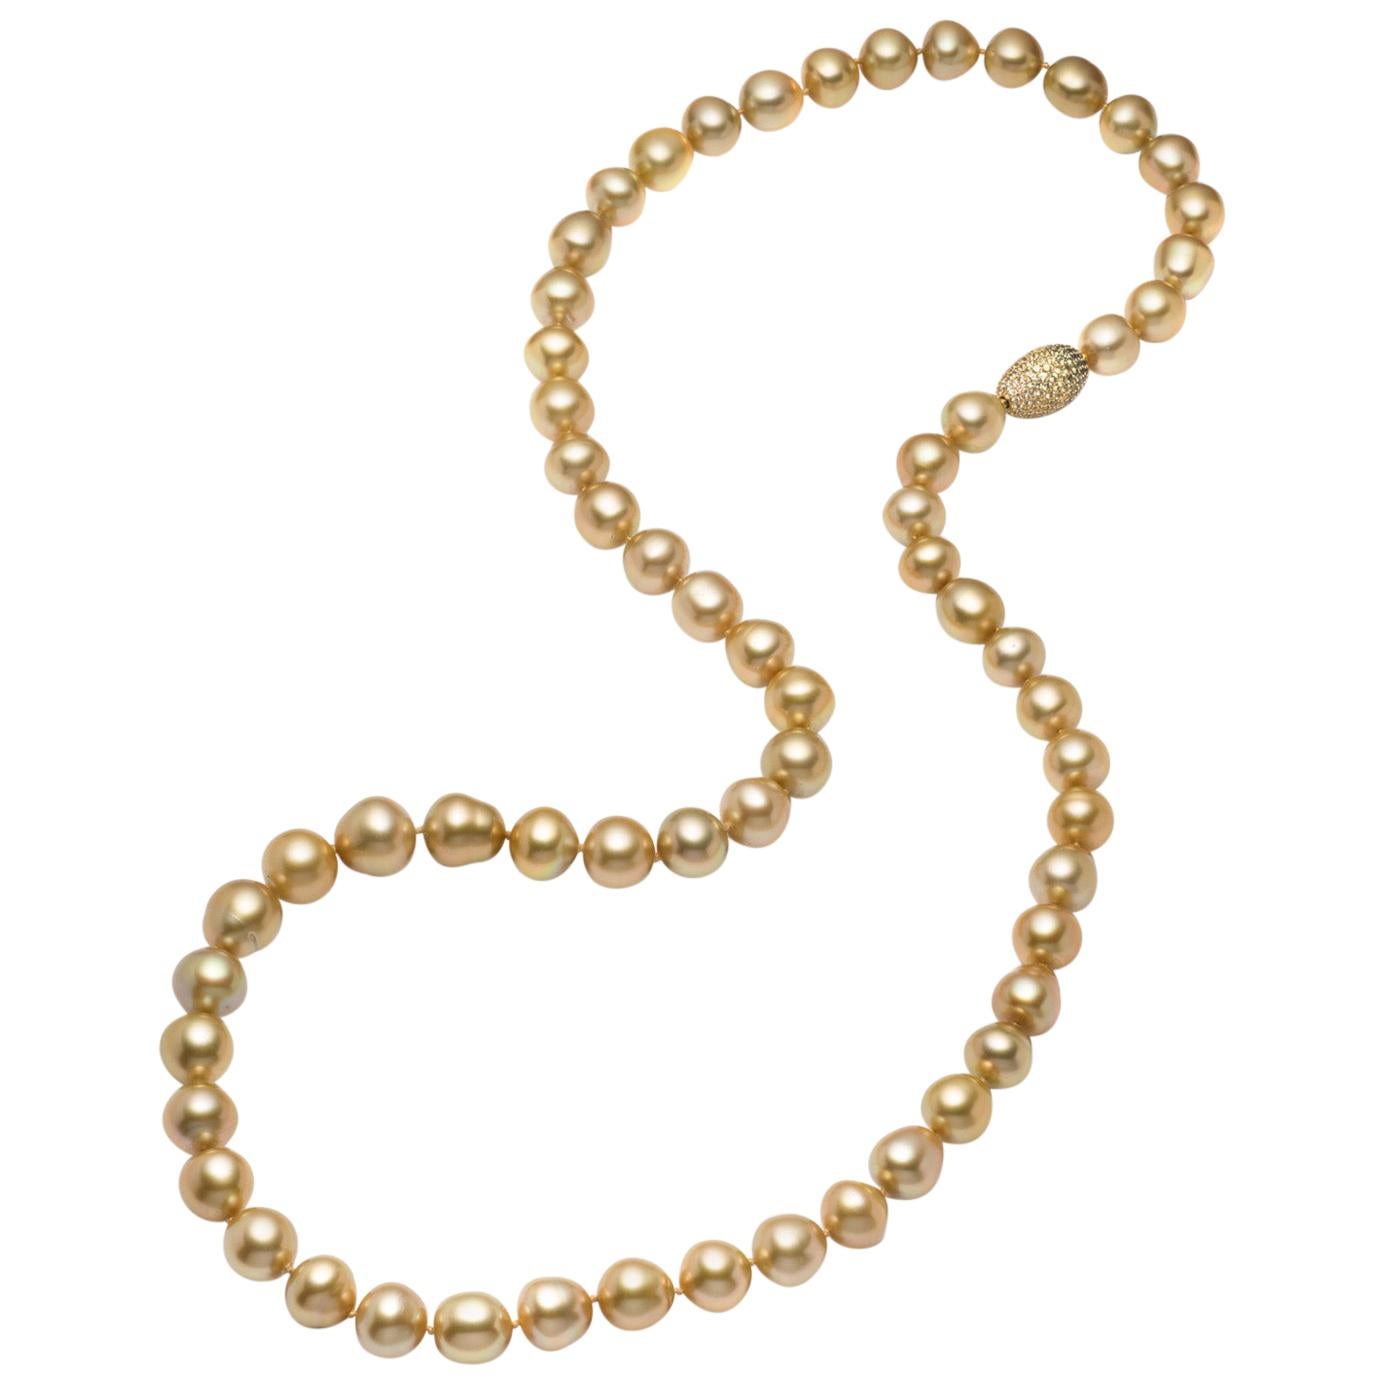 Golden South Sea Cultured Pearl, Sapphire and 18 Karat Gold Sautoir Necklace